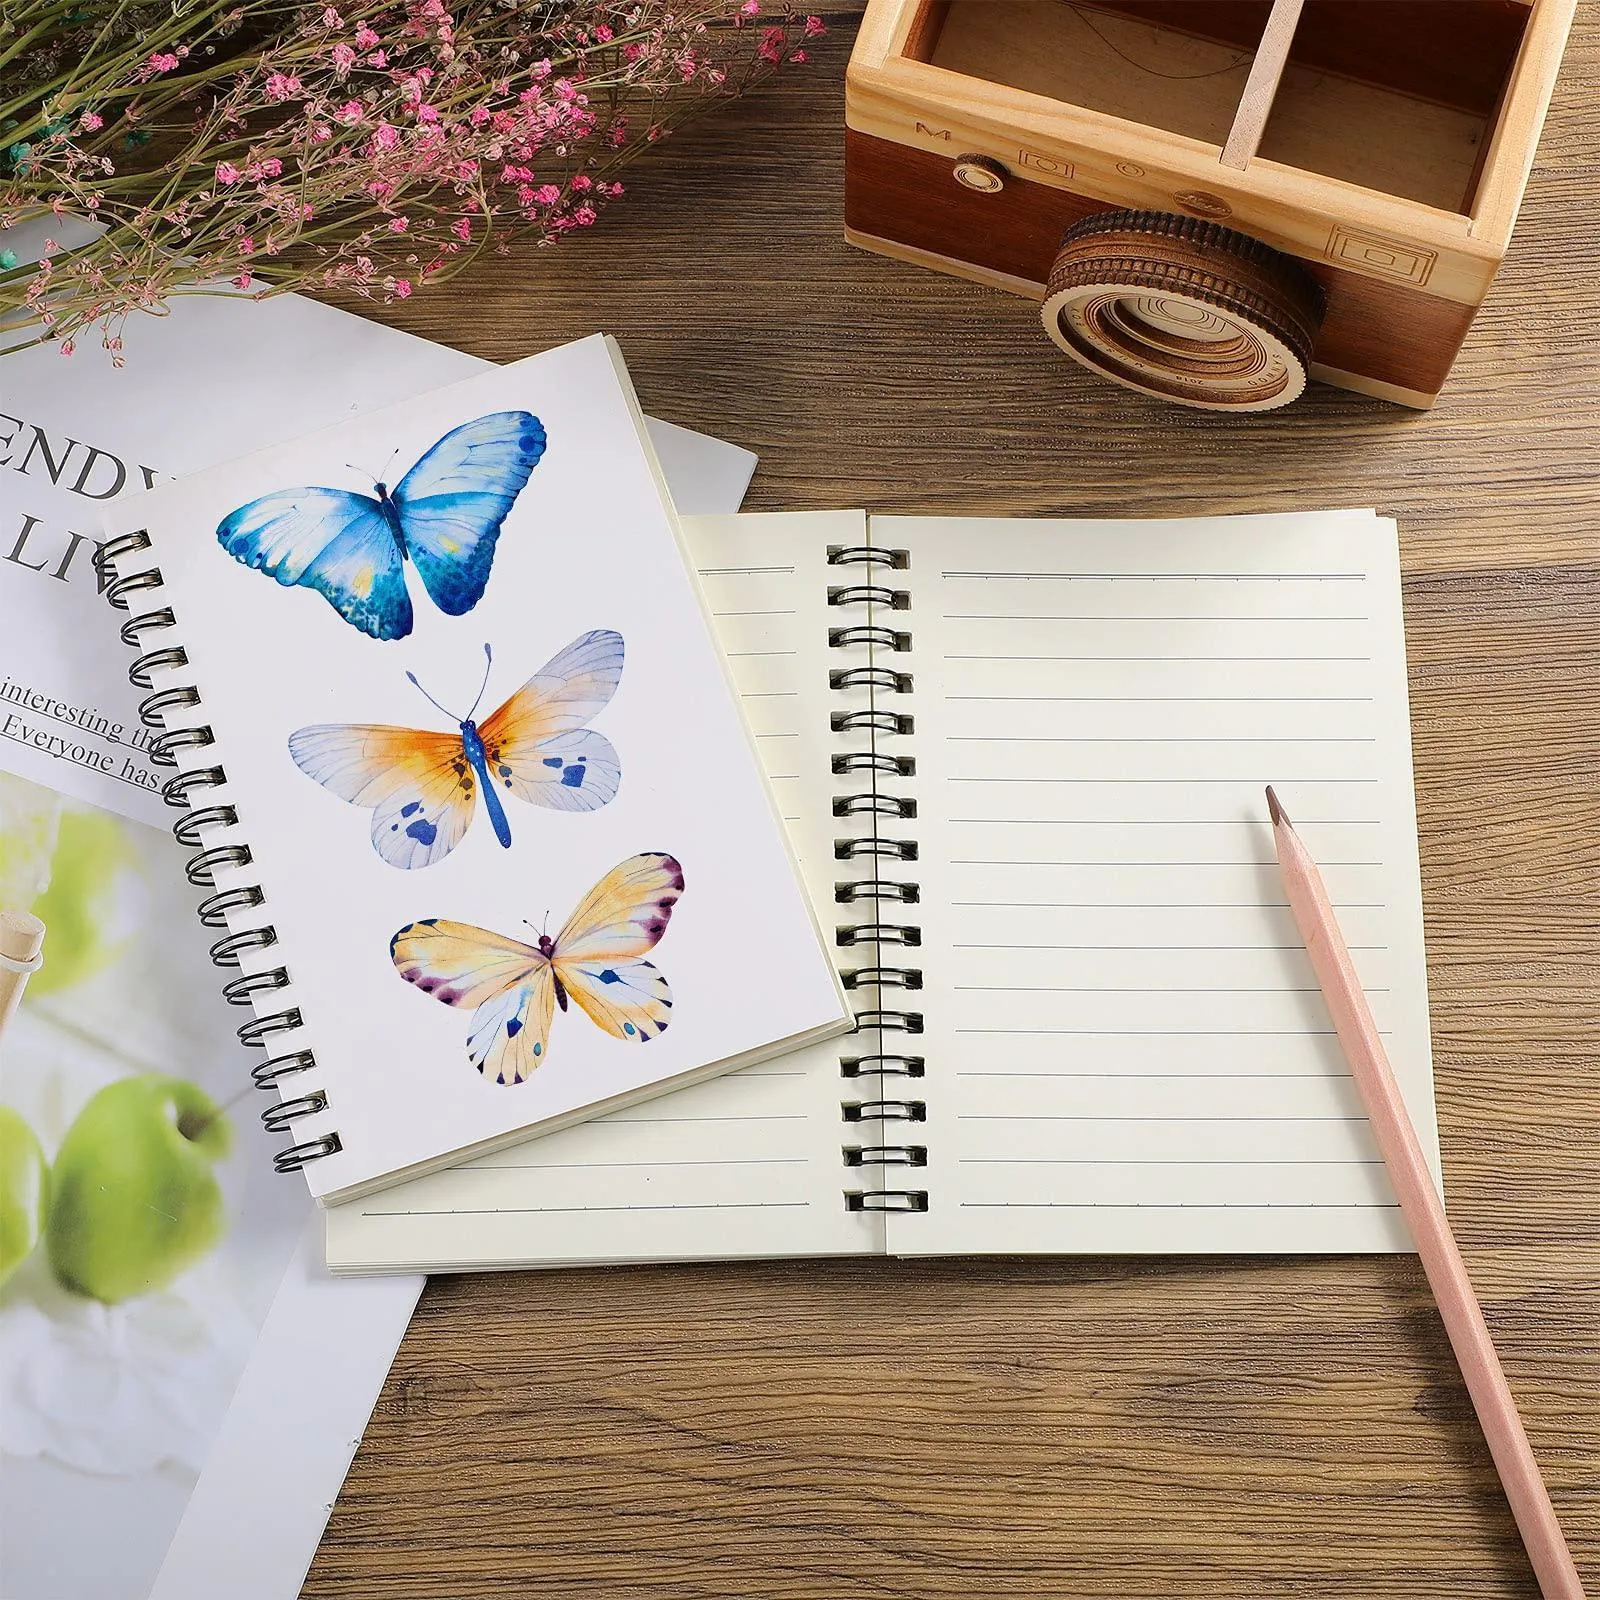 6 x 8 Inch Printable Personalized Writing Sublimation Blank Notepads/Notebook/Journal For Gifts/Promotion